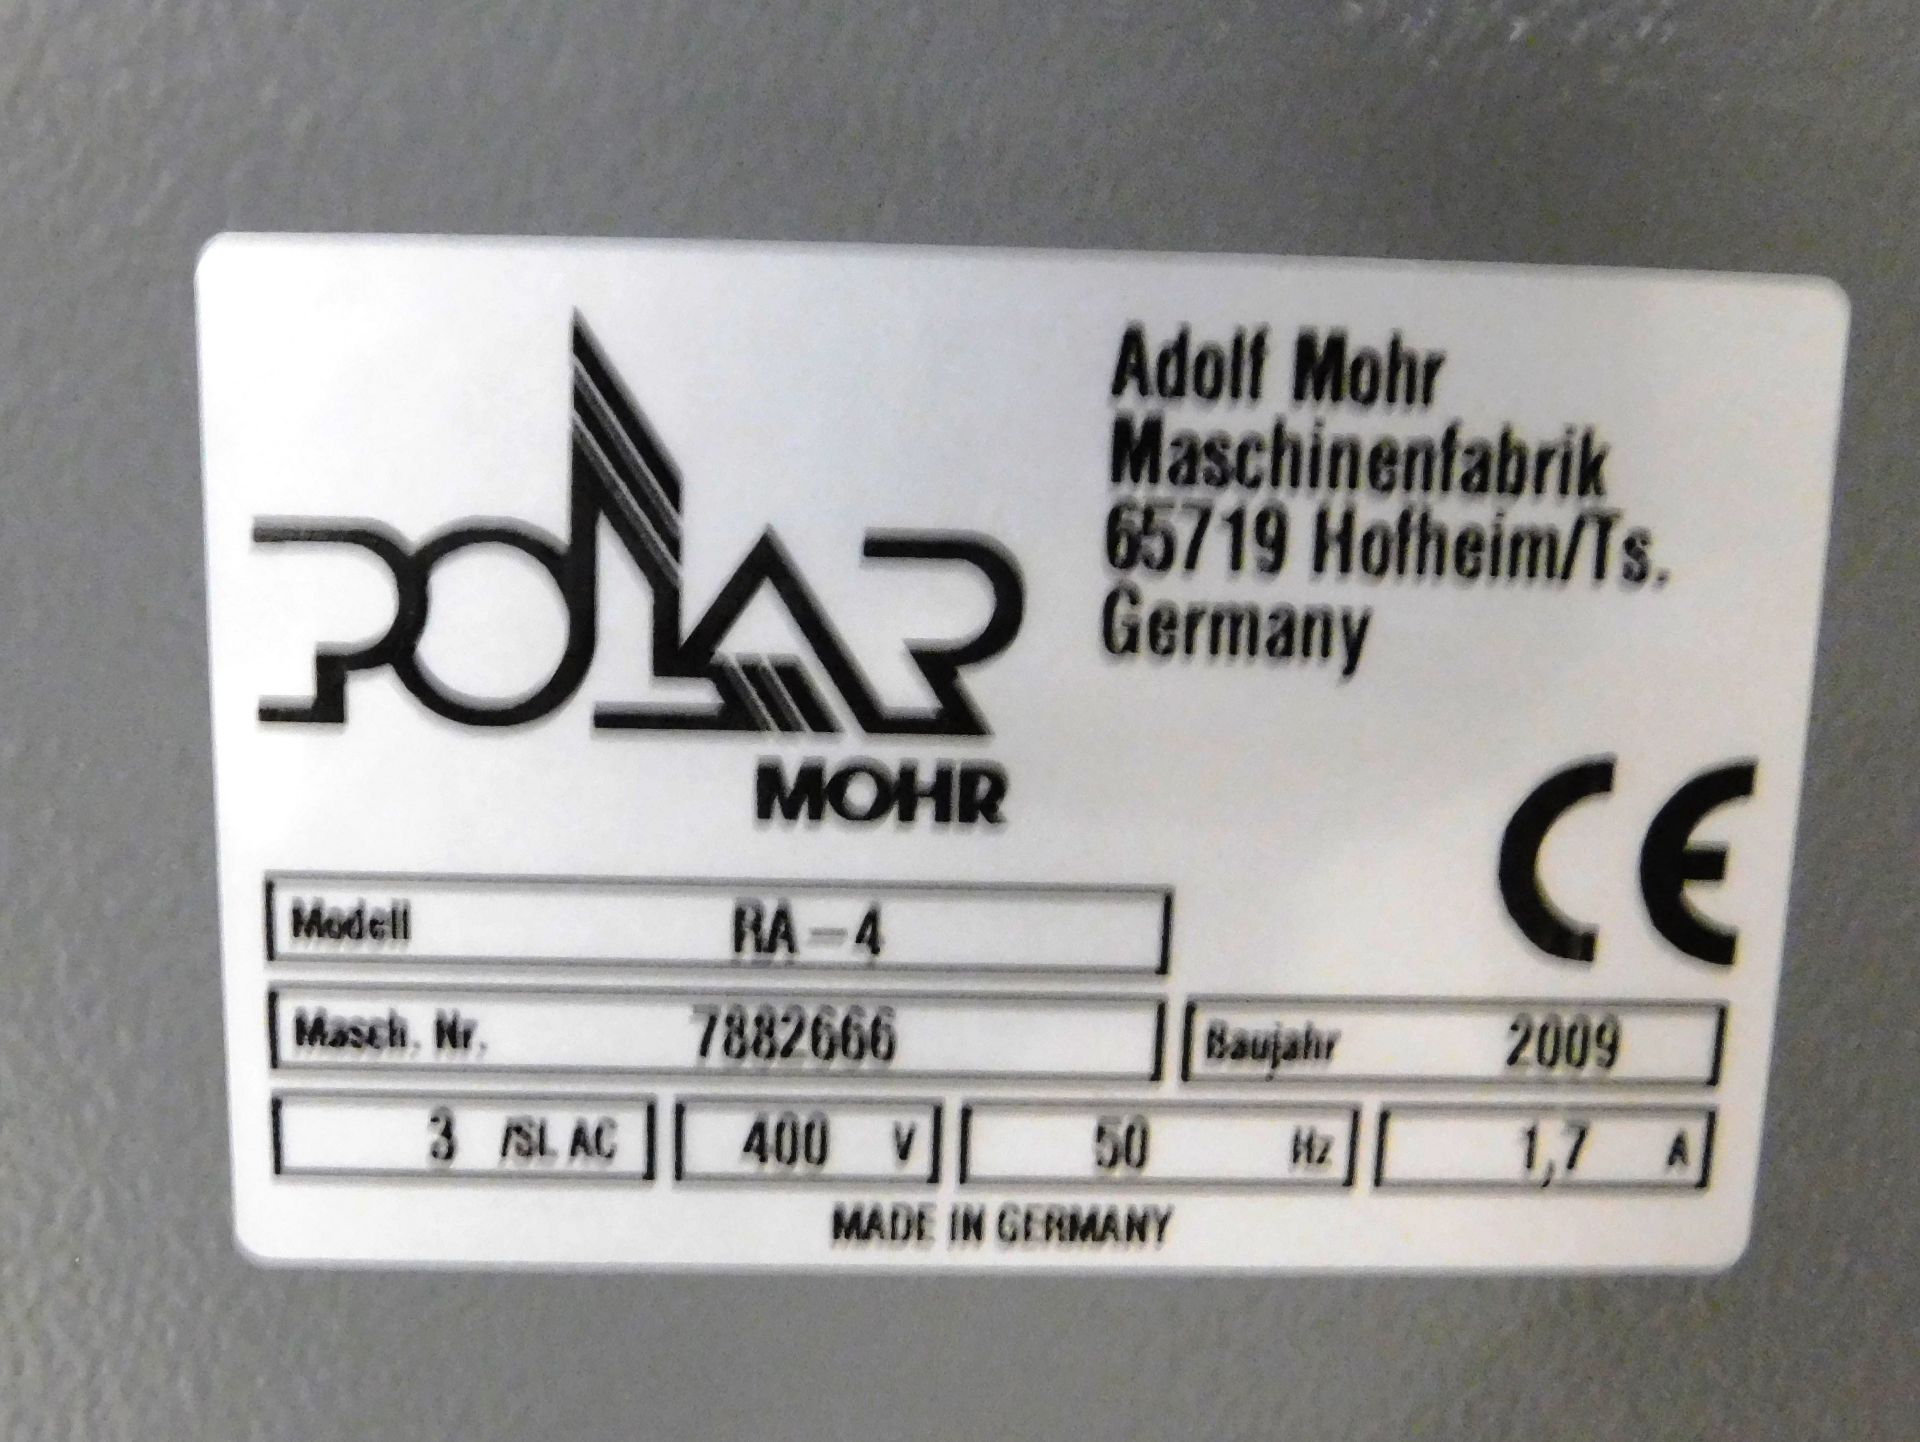 Polar RA-4 Automatic Jogger Serial Number 7882666 - Image 2 of 2